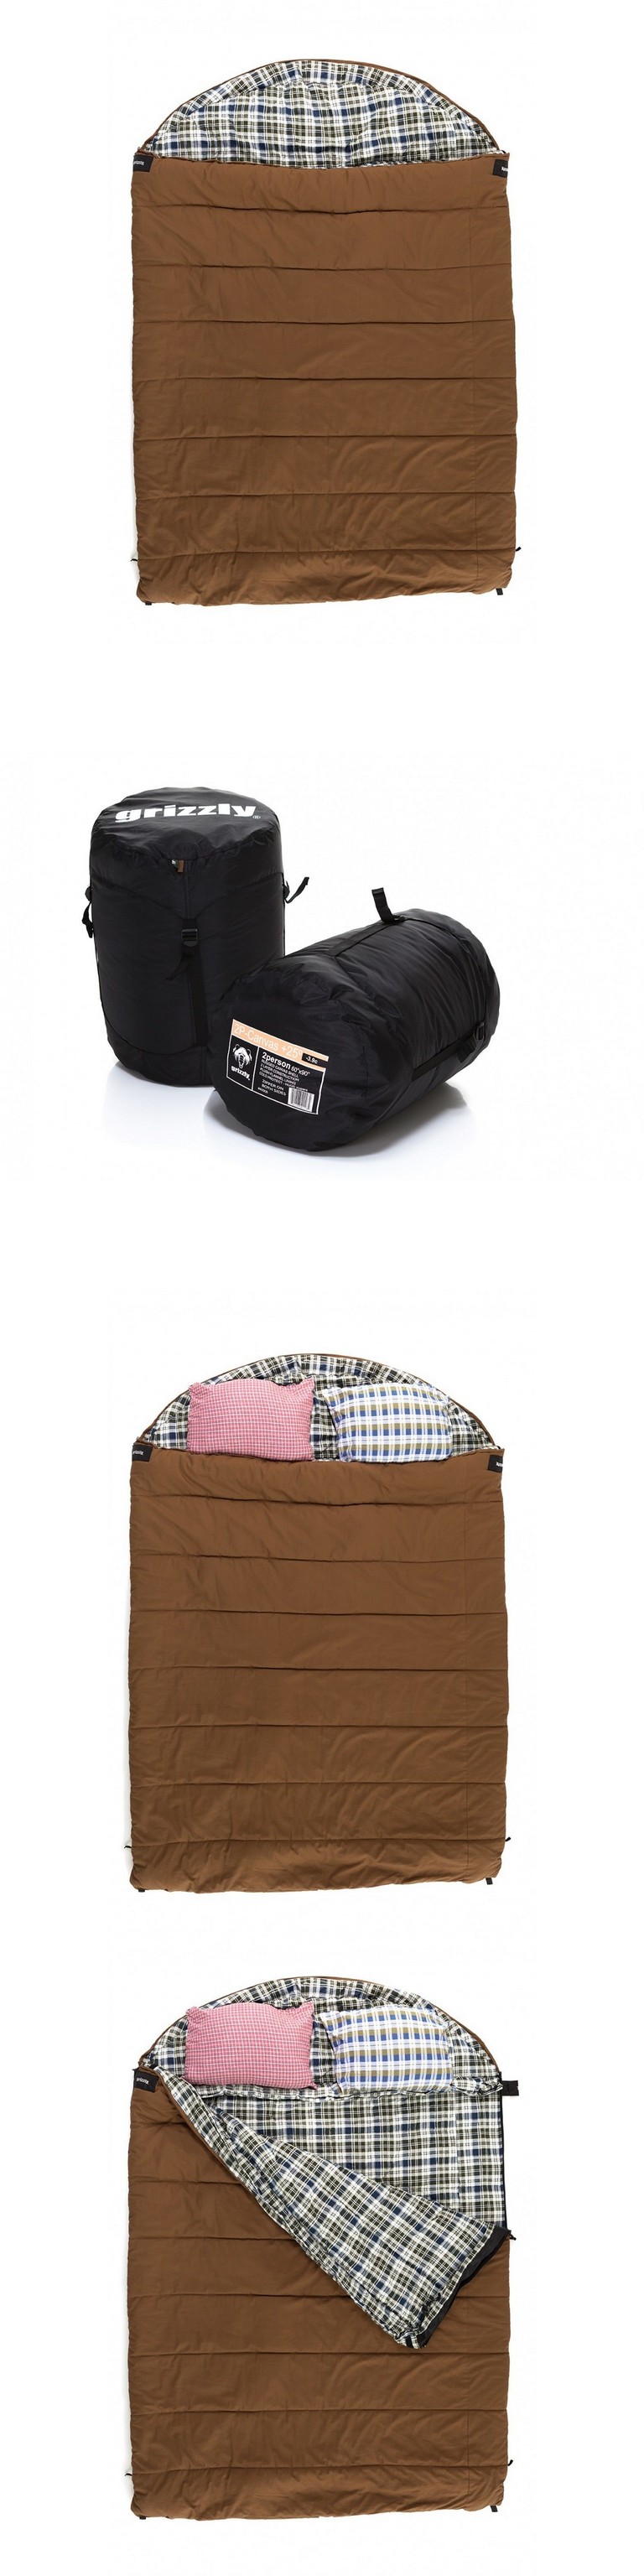 2 Person Sleeping Bags